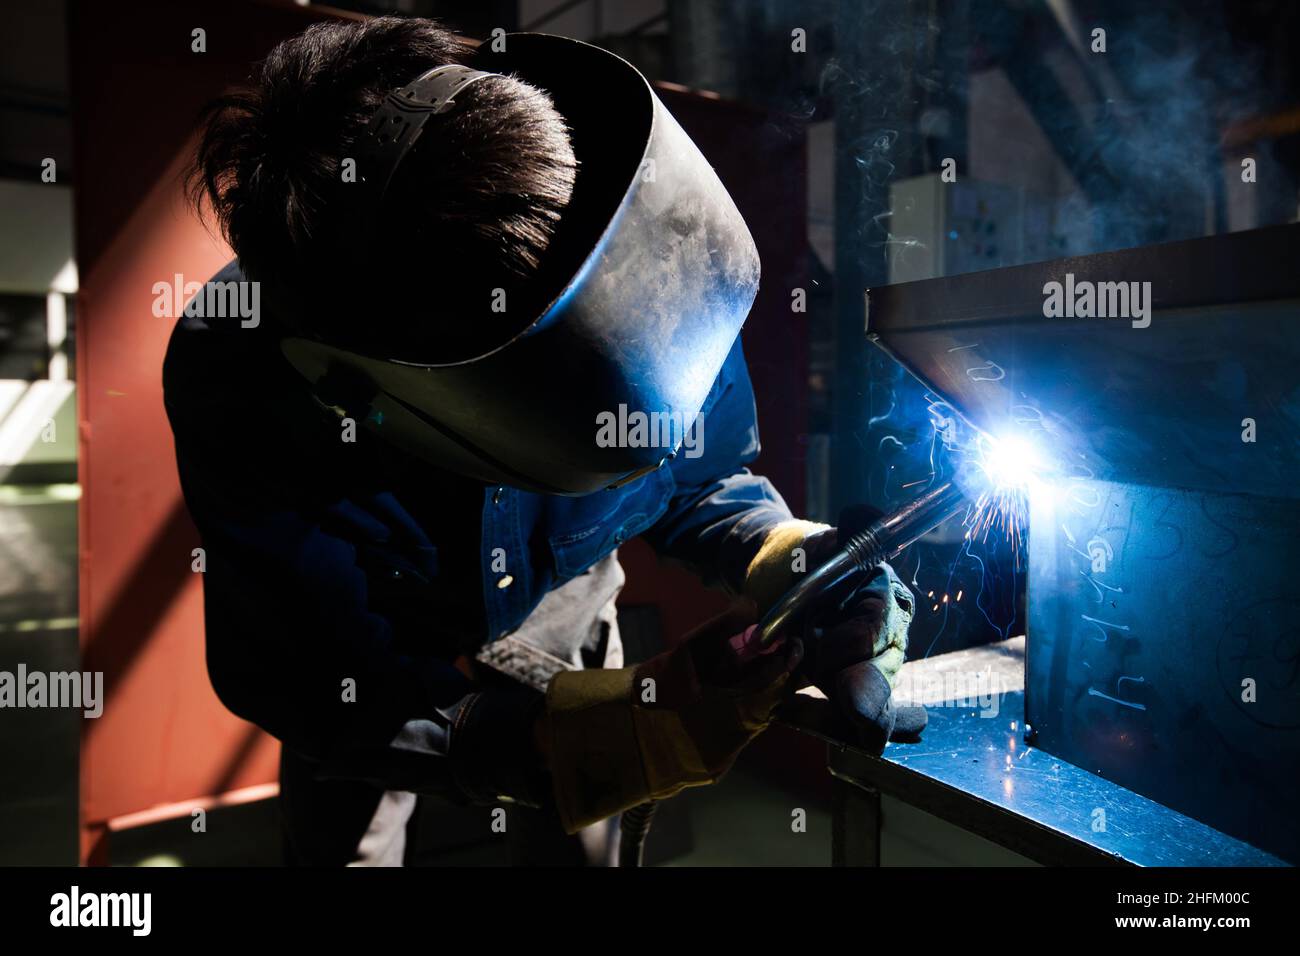 Welding works. Wire welding of Metal. Bright light and sparks. Worker in mask and gloves. Stock Photo